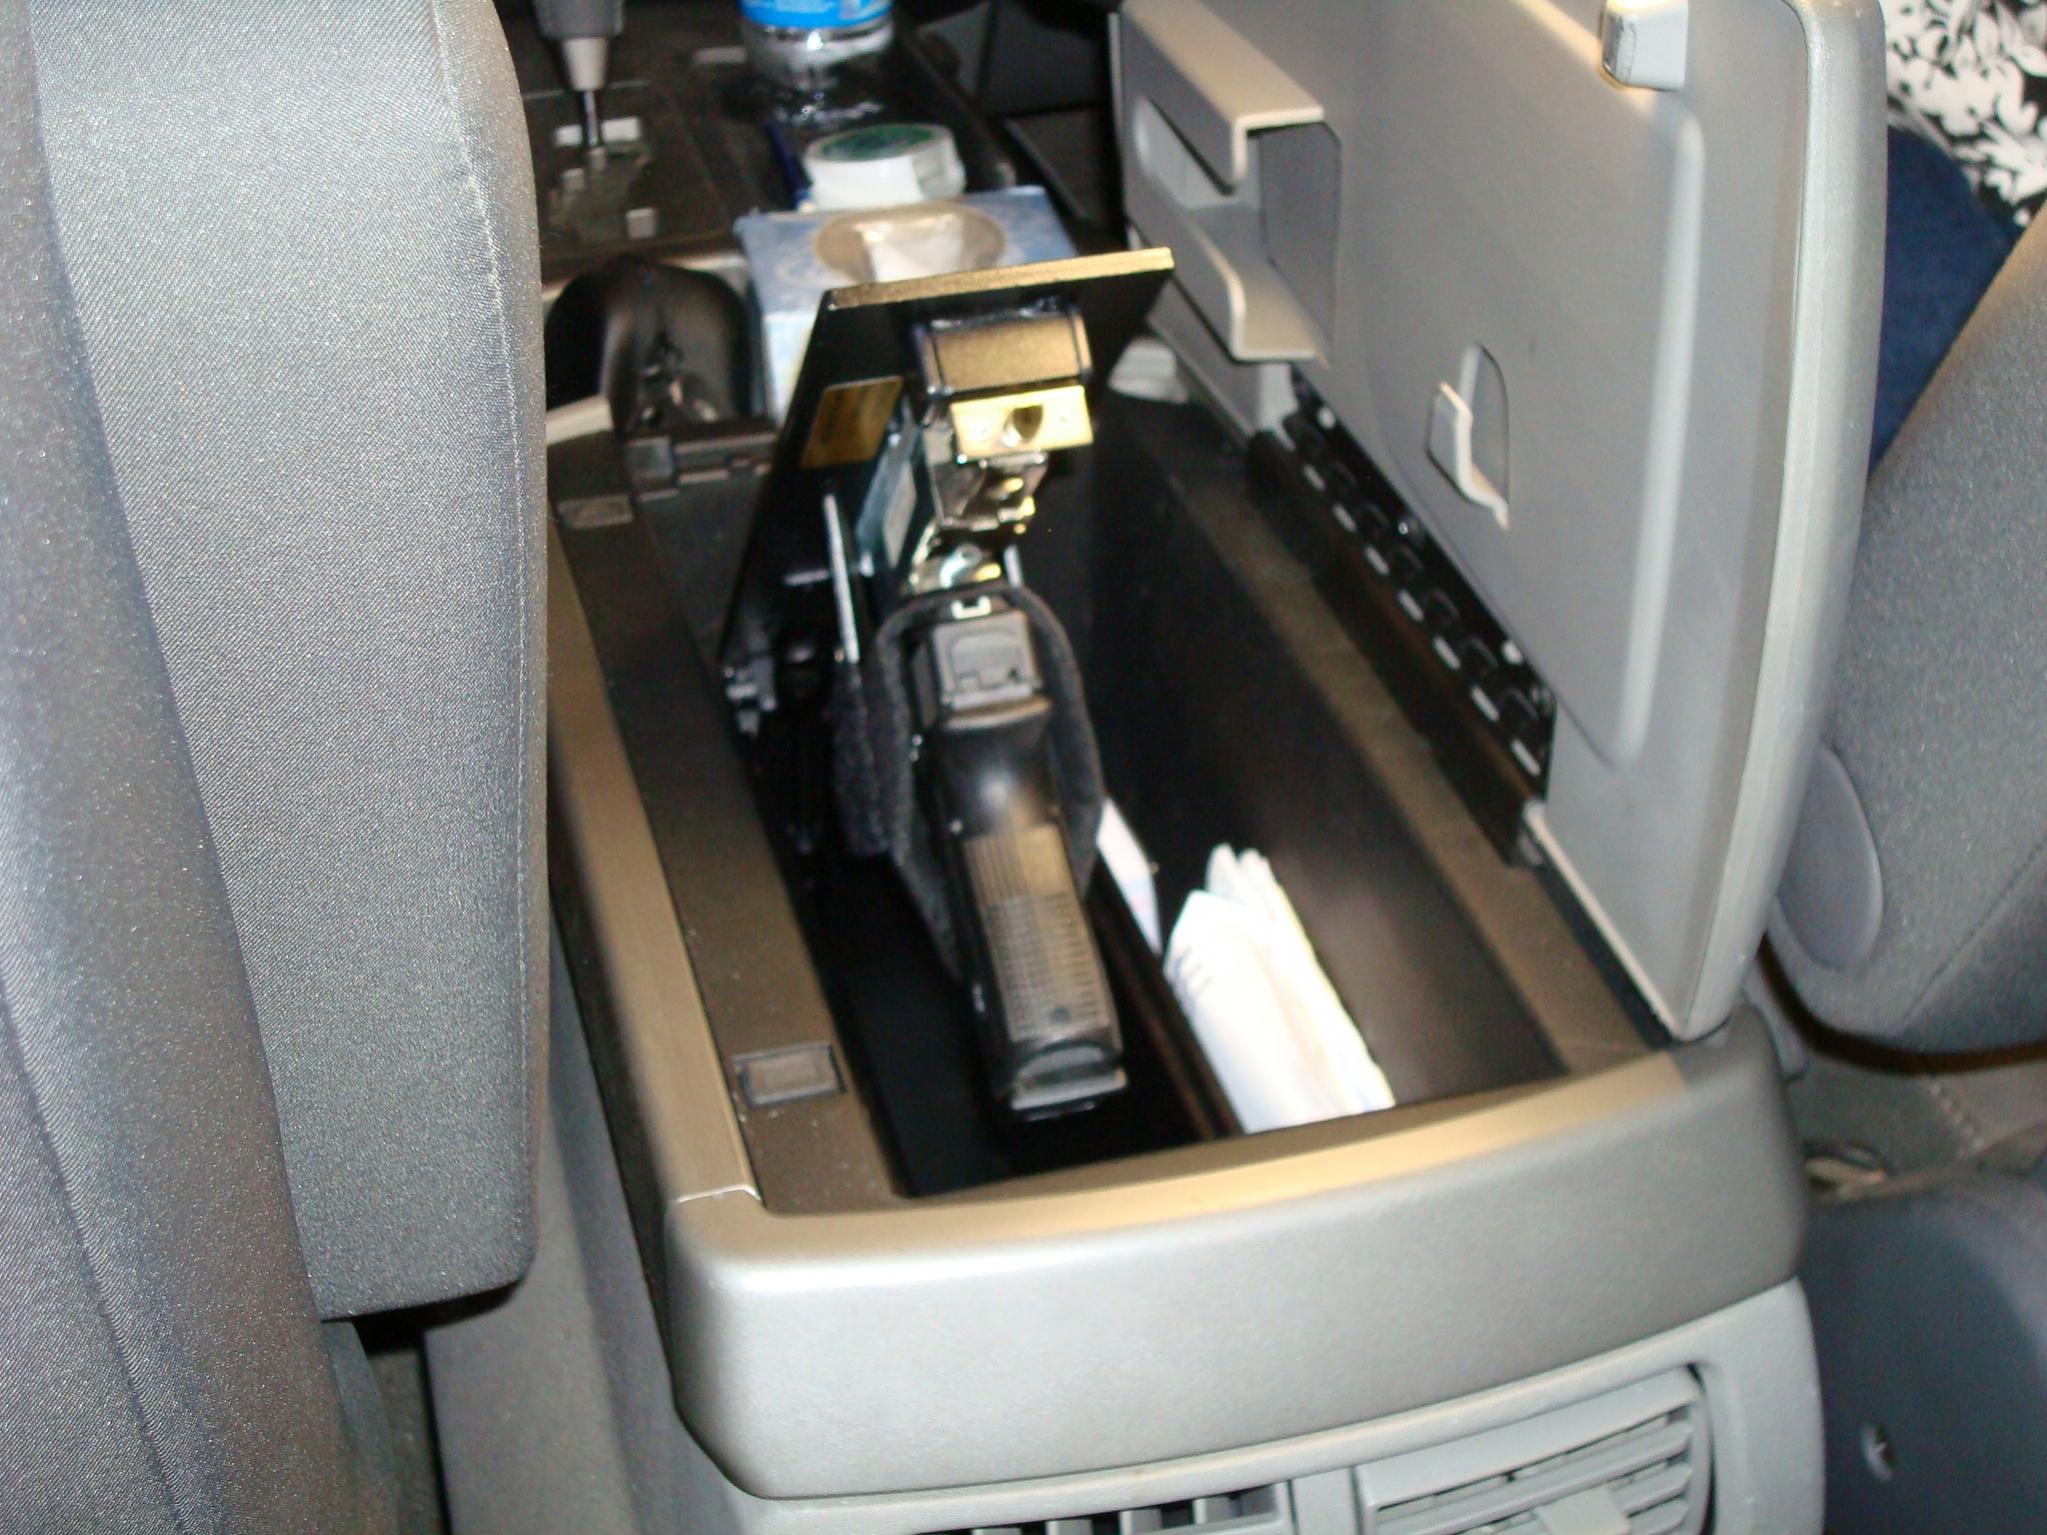 This user mounted a pop up gun safe to the center console of his